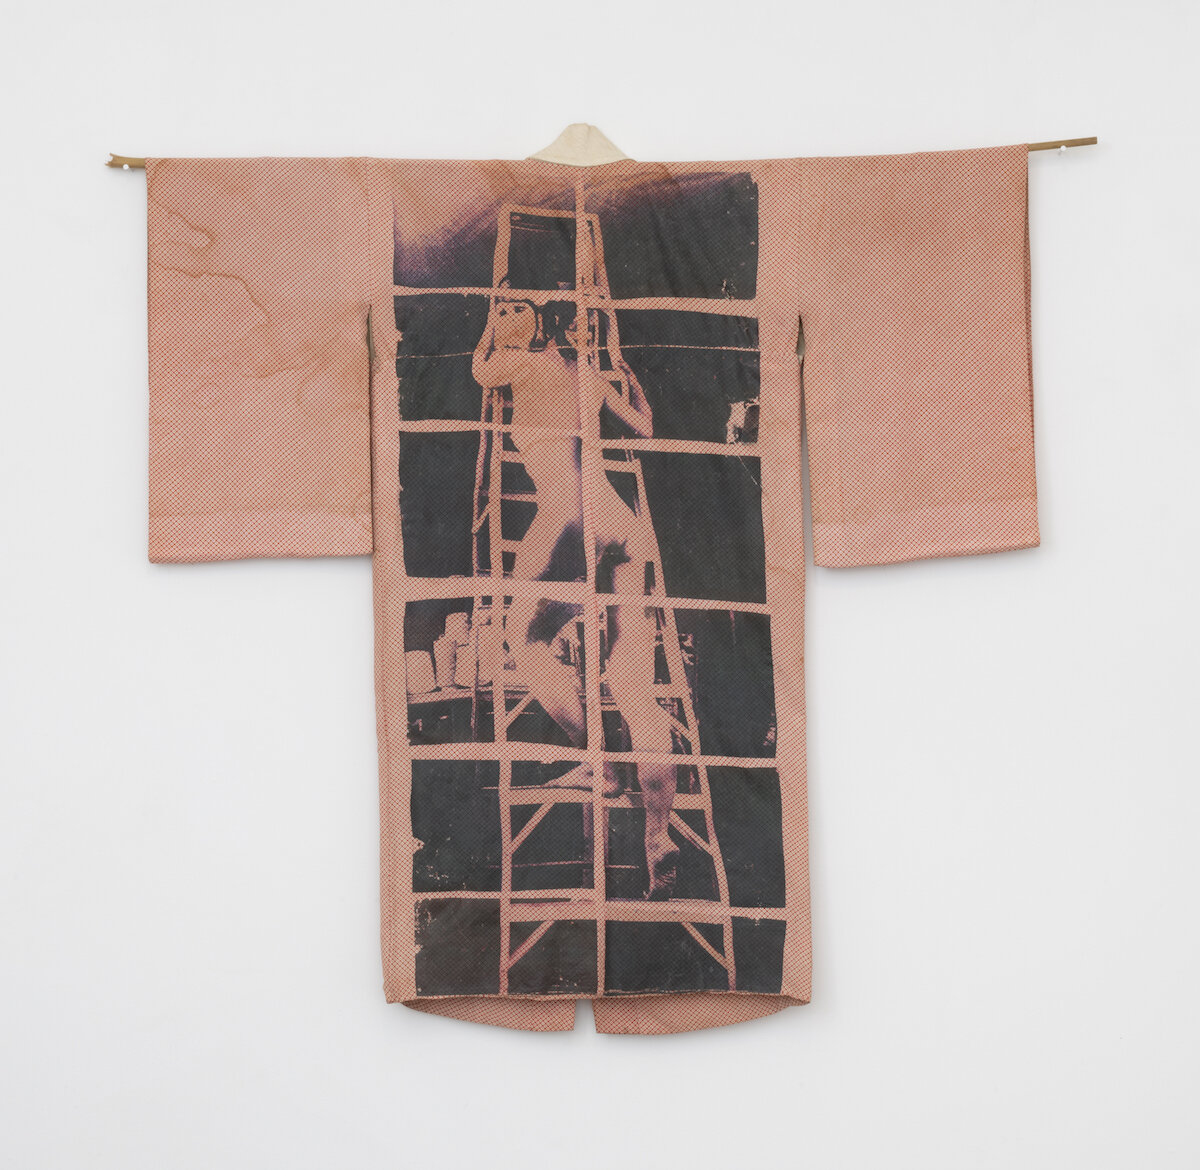   Woman on the Step Ladder , 1987, Antique kimono with iron-on transfer, 48 x 48 in, Image Courtesy of the Sol LeWitt Collection 